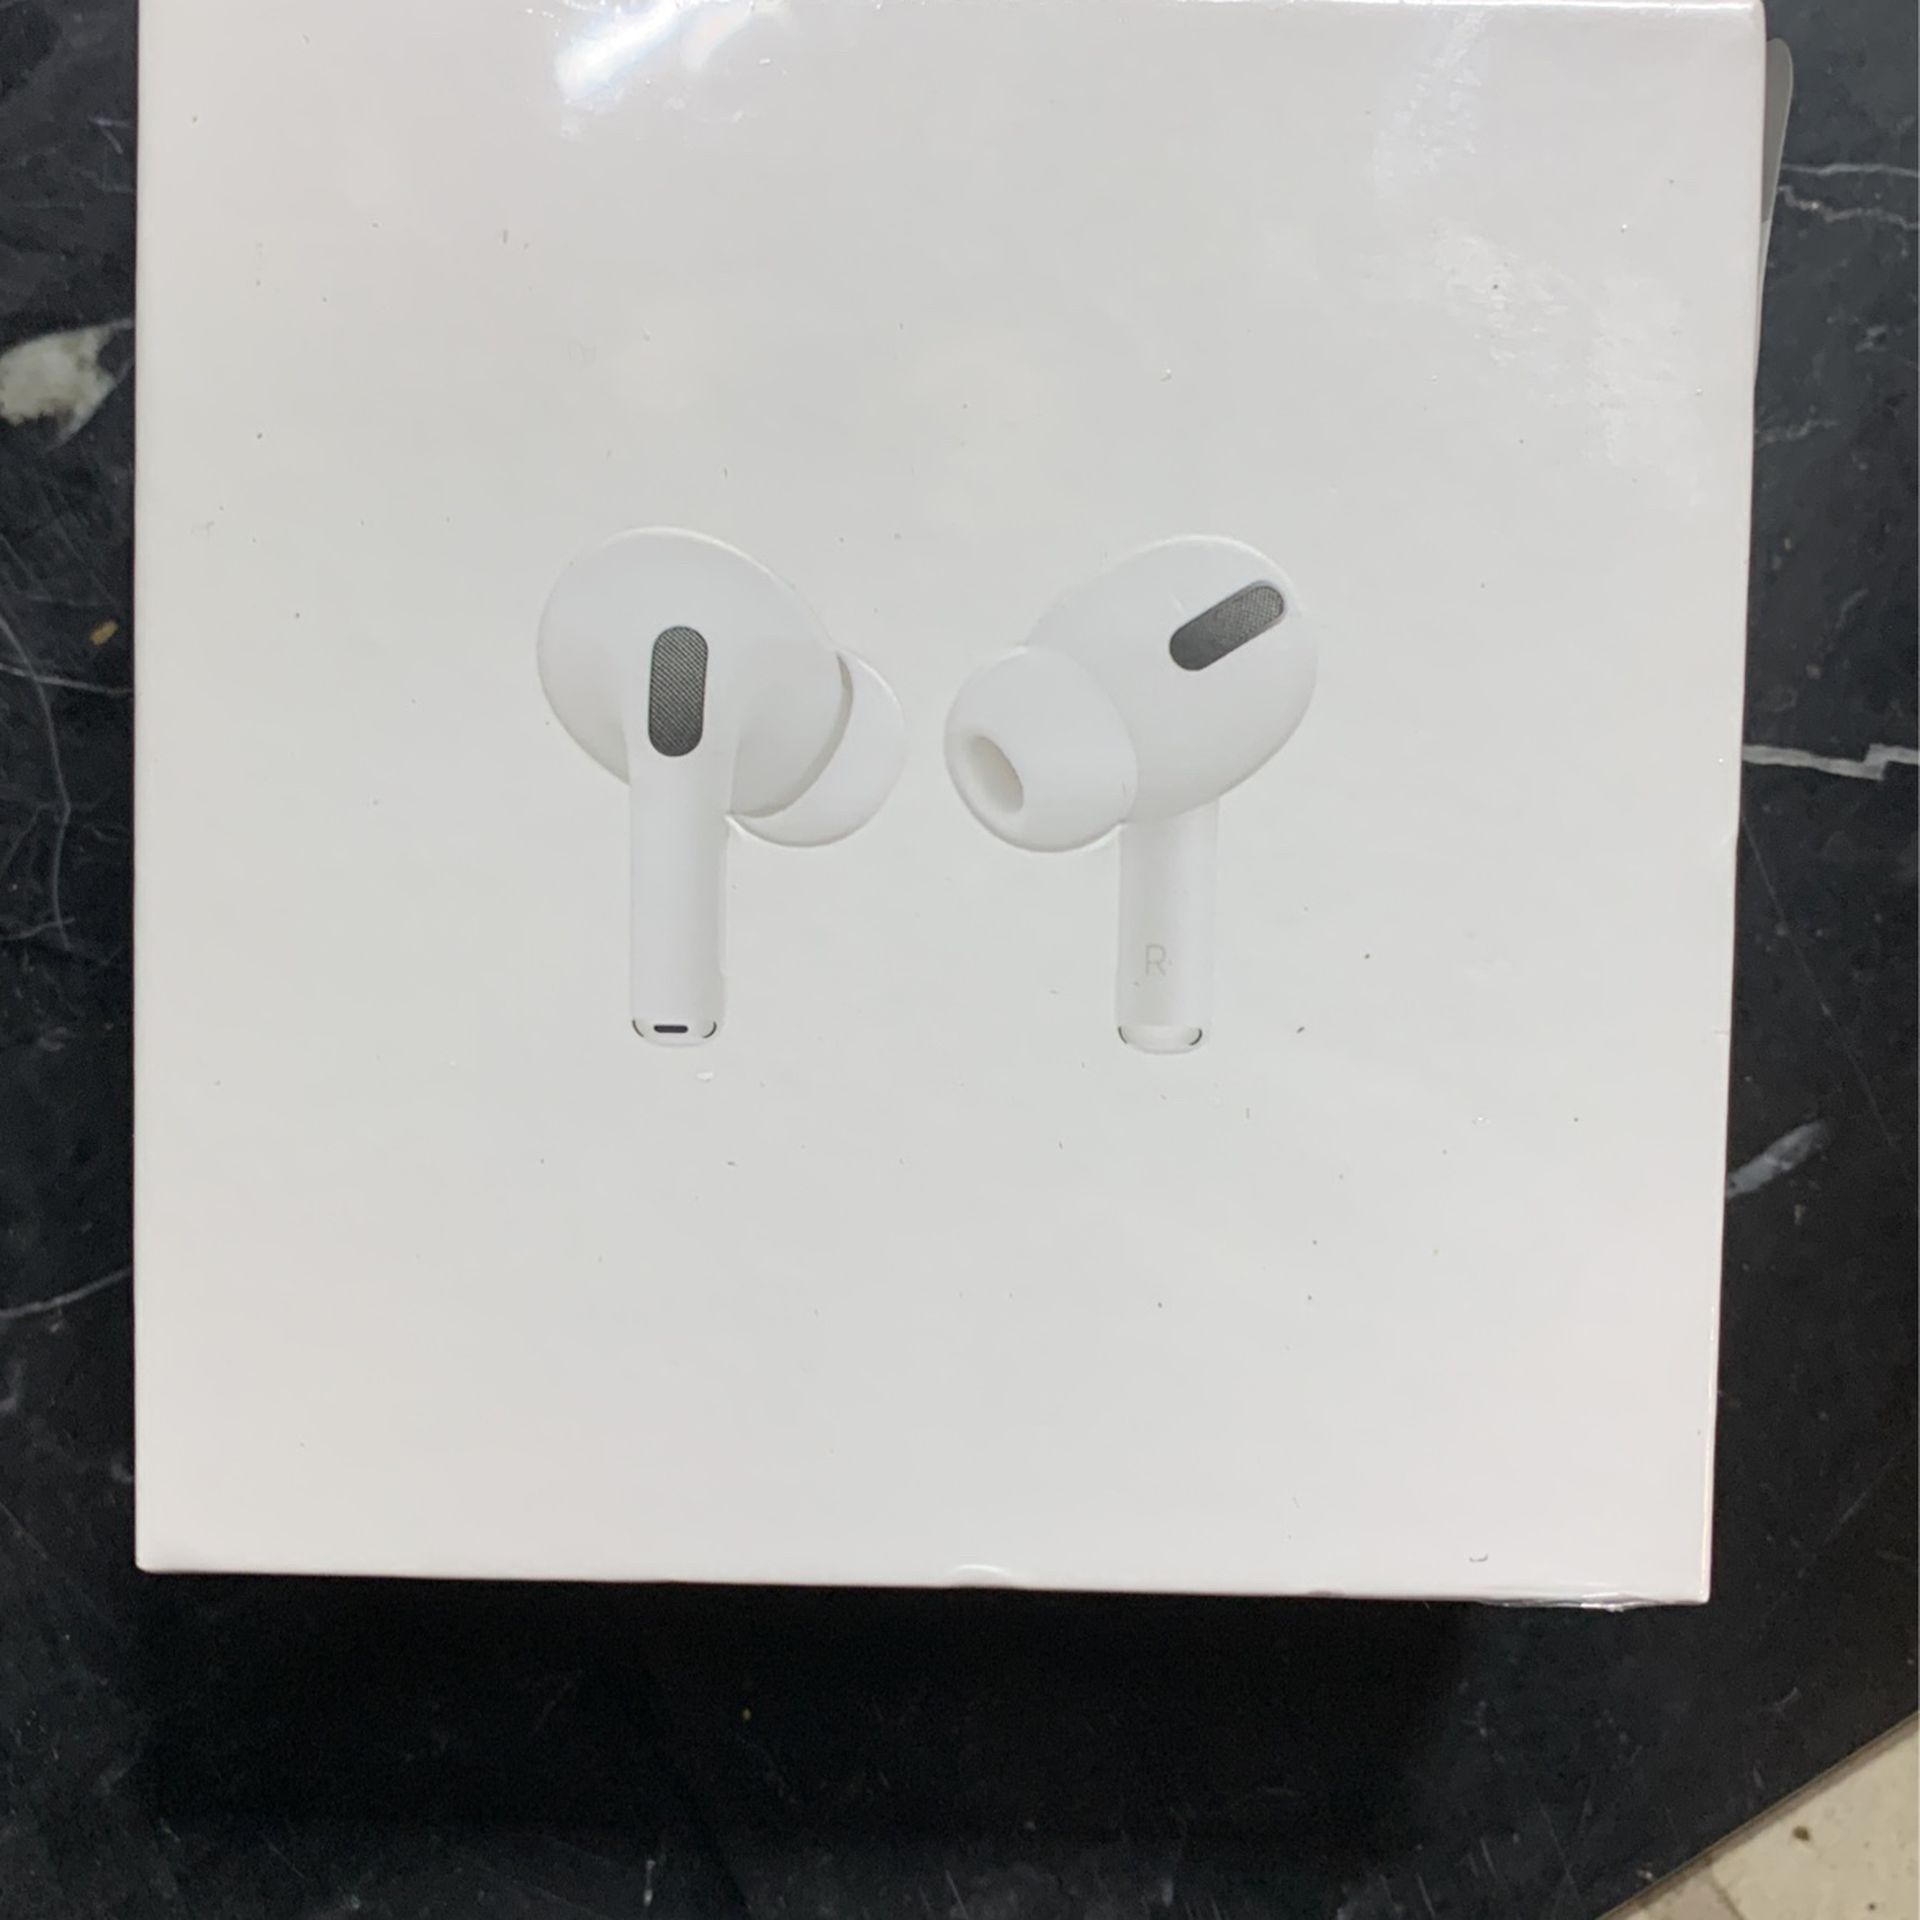 Apple AirPods Generation 2 